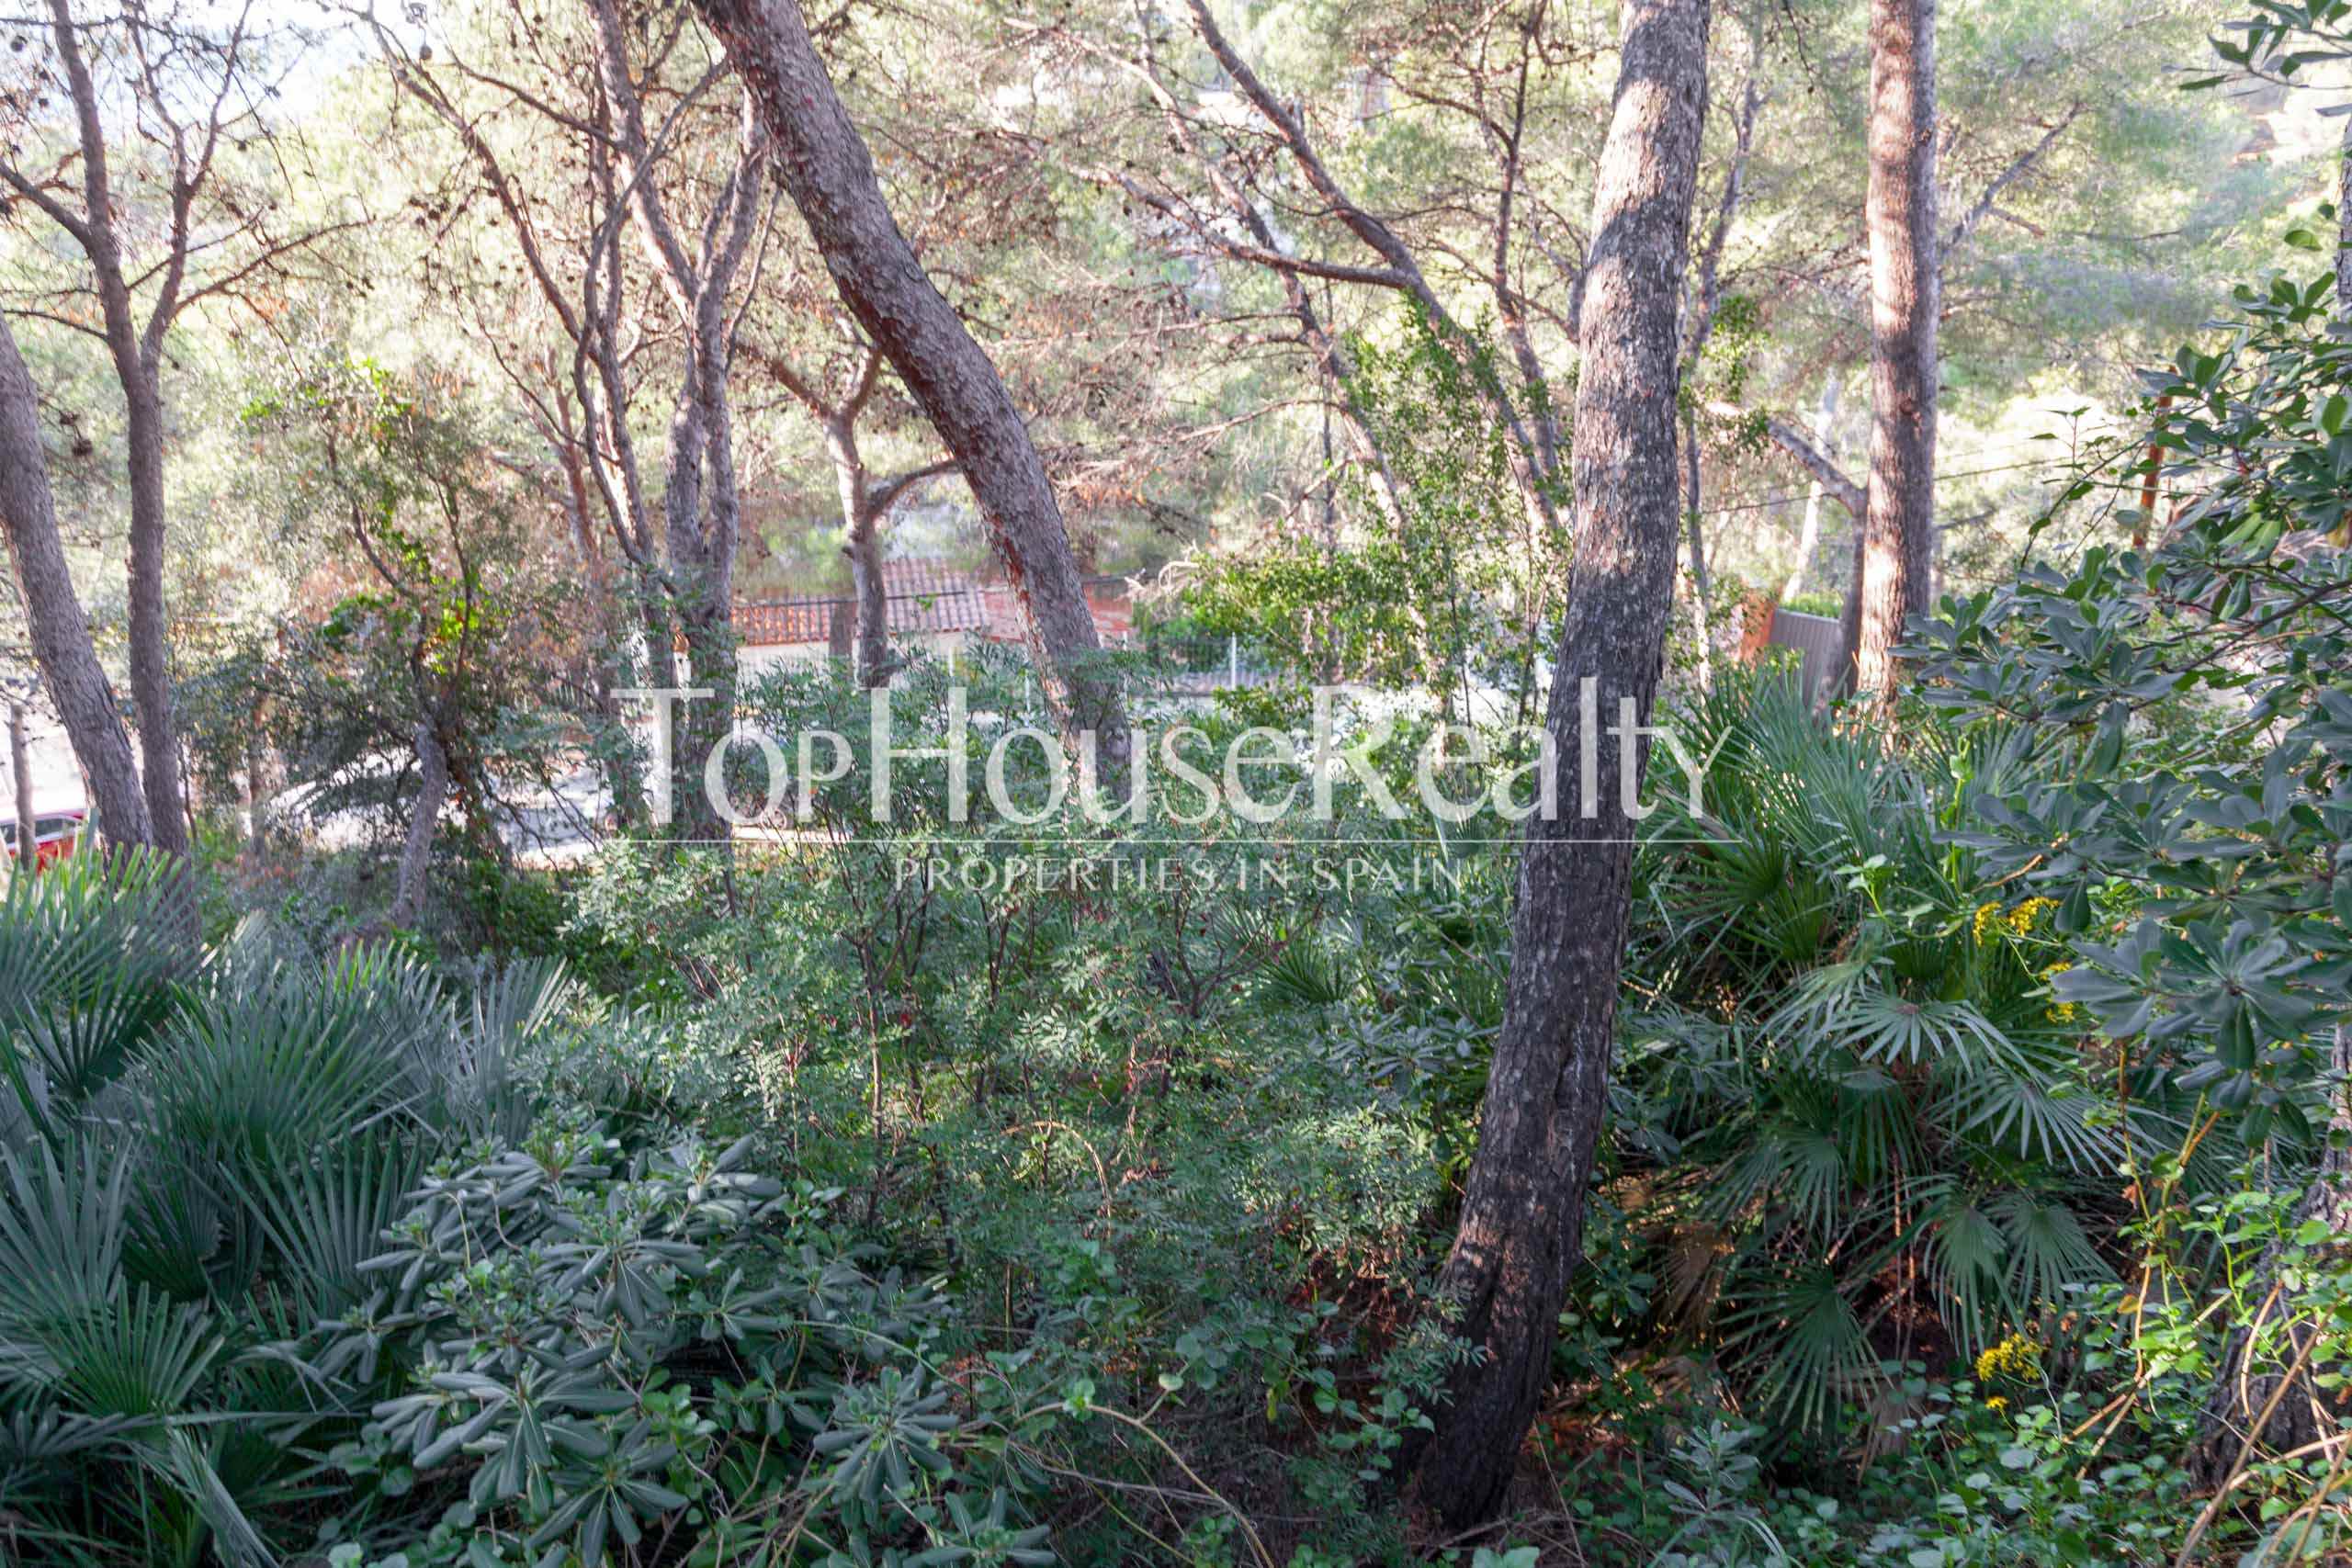 Incredible property with large plot and views at the top of Castelldefels